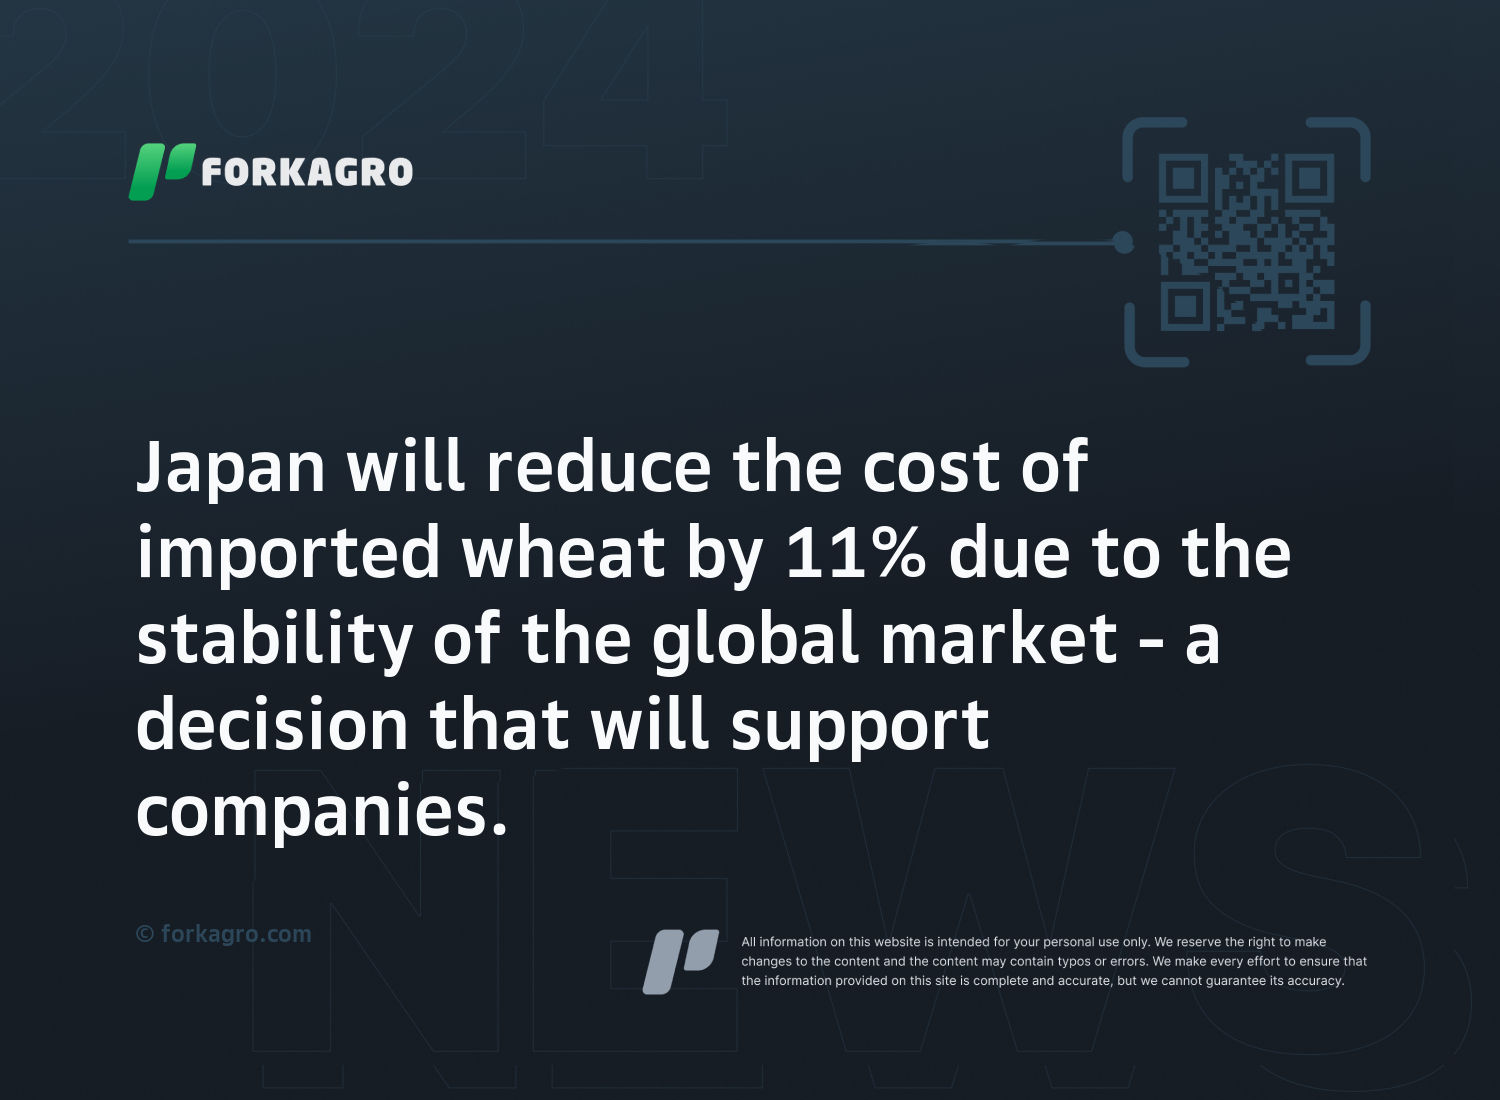 Japan will reduce the cost of imported wheat by 11% due to the stability of the global market - a decision that will support companies.